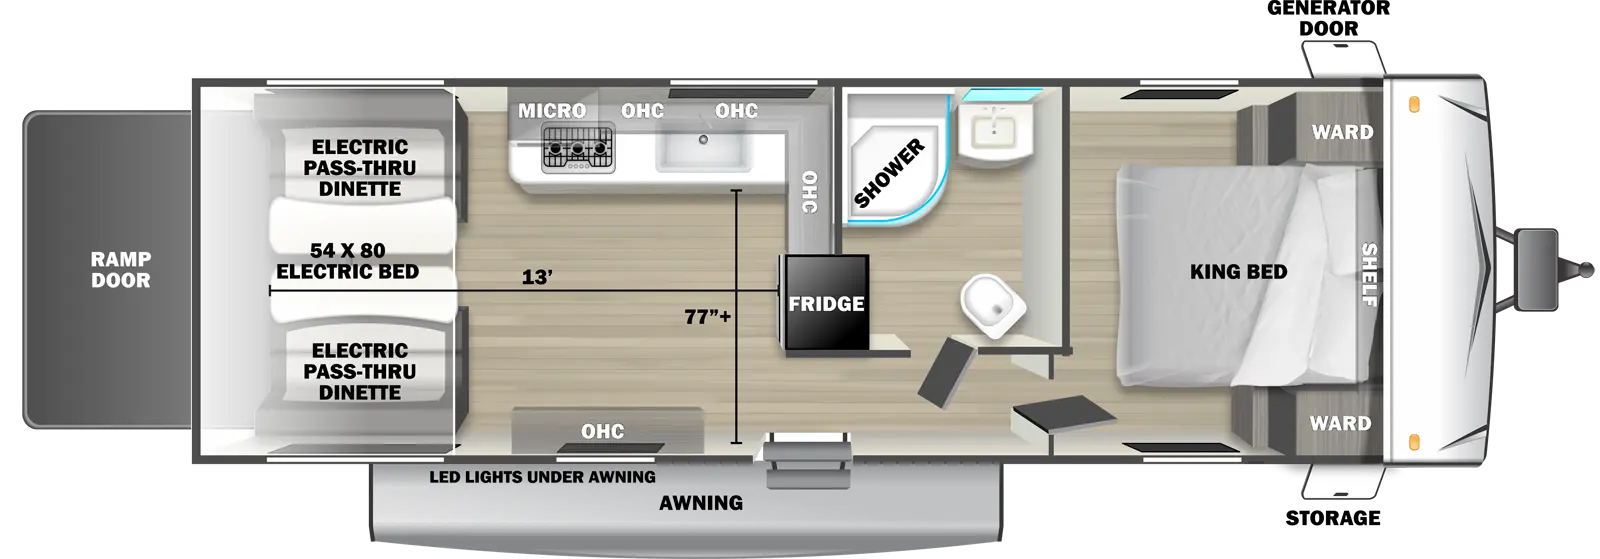 The 2550SRX travel trailer has no slide outs, 1 entry door and 1 rear ramp door. Exterior features include an awning with LED lights, front door side storage and front off-door side generator door. Interior layout from front to back includes: front bedroom with foot-facing King bed, shelf over the bed, and front corner wardrobes; off-door side bathroom with shower, linen storage, toilet and single sink vanity; off-door side kitchen with L-shaped countertop, overhead microwave, overhead cabinets, sink and refrigerator; door side overhead cabinet; rear 54 x 80 electric bed over electric pass-through dinette. Cargo length from rear of unit to refrigerator is 13 ft. Cargo width from kitchen countertop to door side wall is 77 inches.